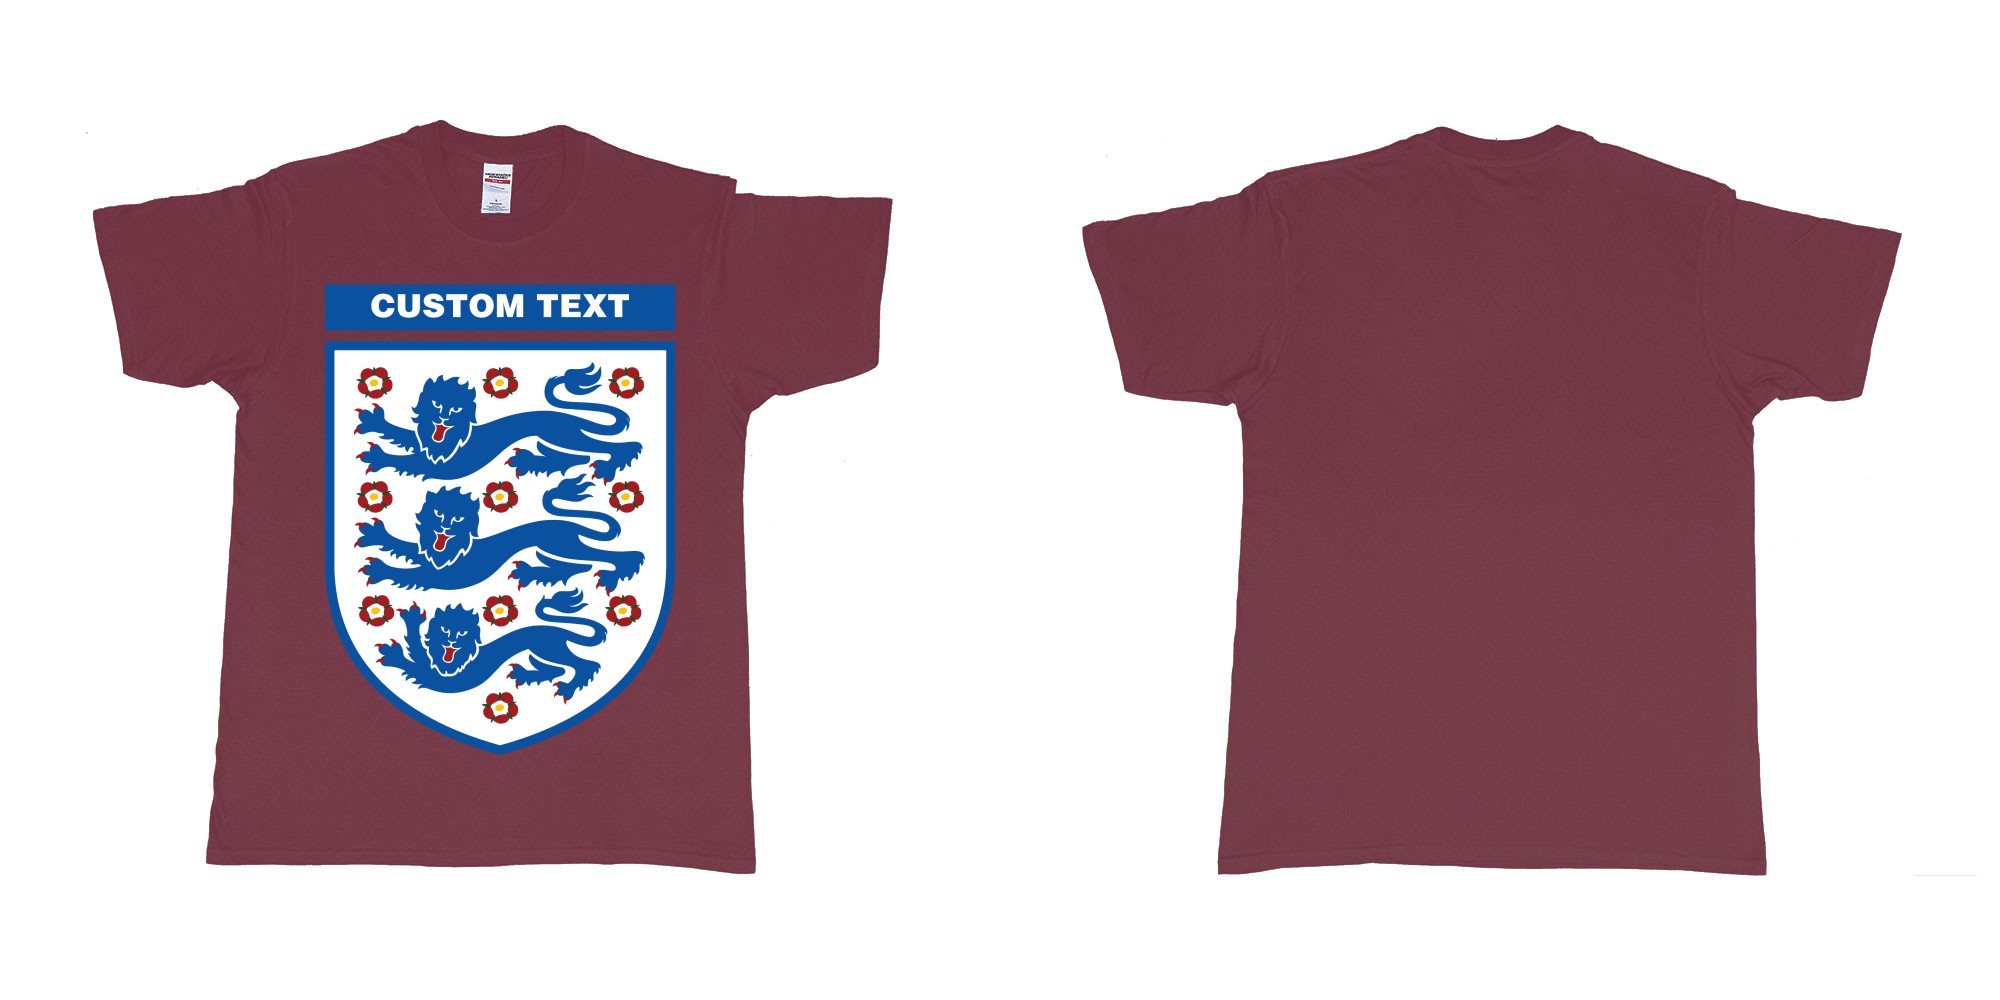 Custom tshirt design england national football team logo in fabric color marron choice your own text made in Bali by The Pirate Way